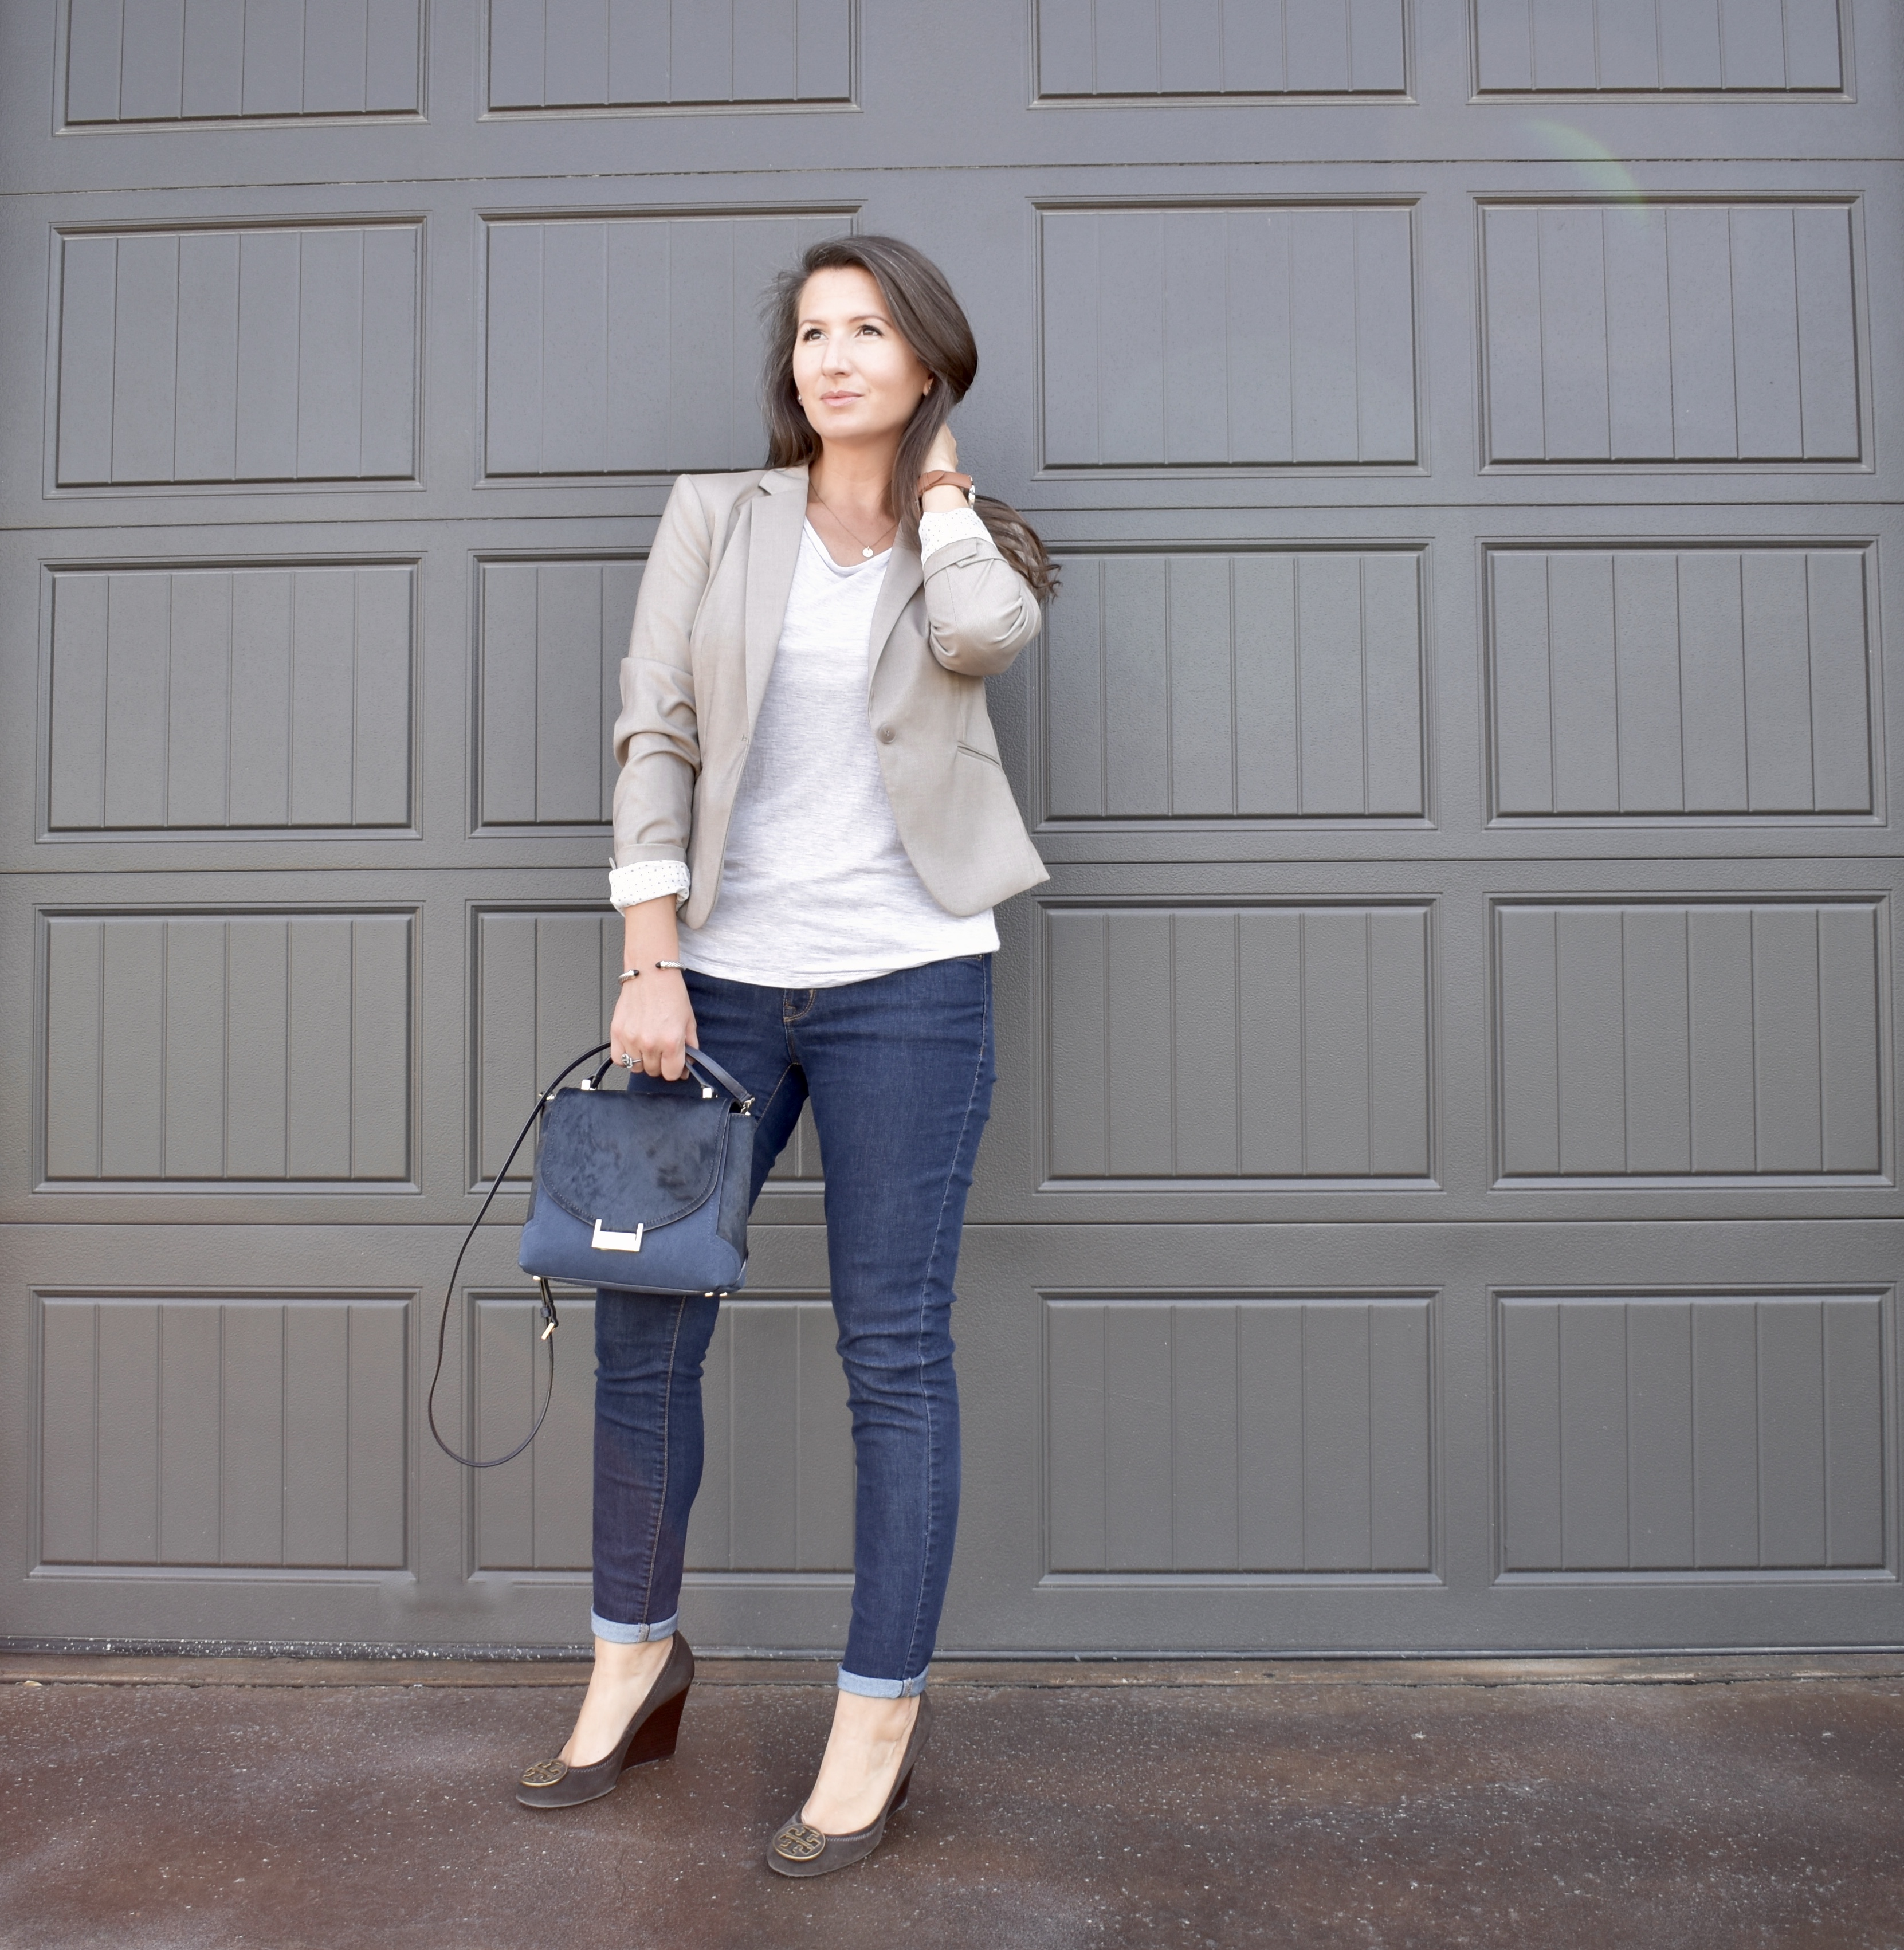 Business Casual Meets Chic | workwear, office style, jeans, blazer, wedges, tory burch, kate spade